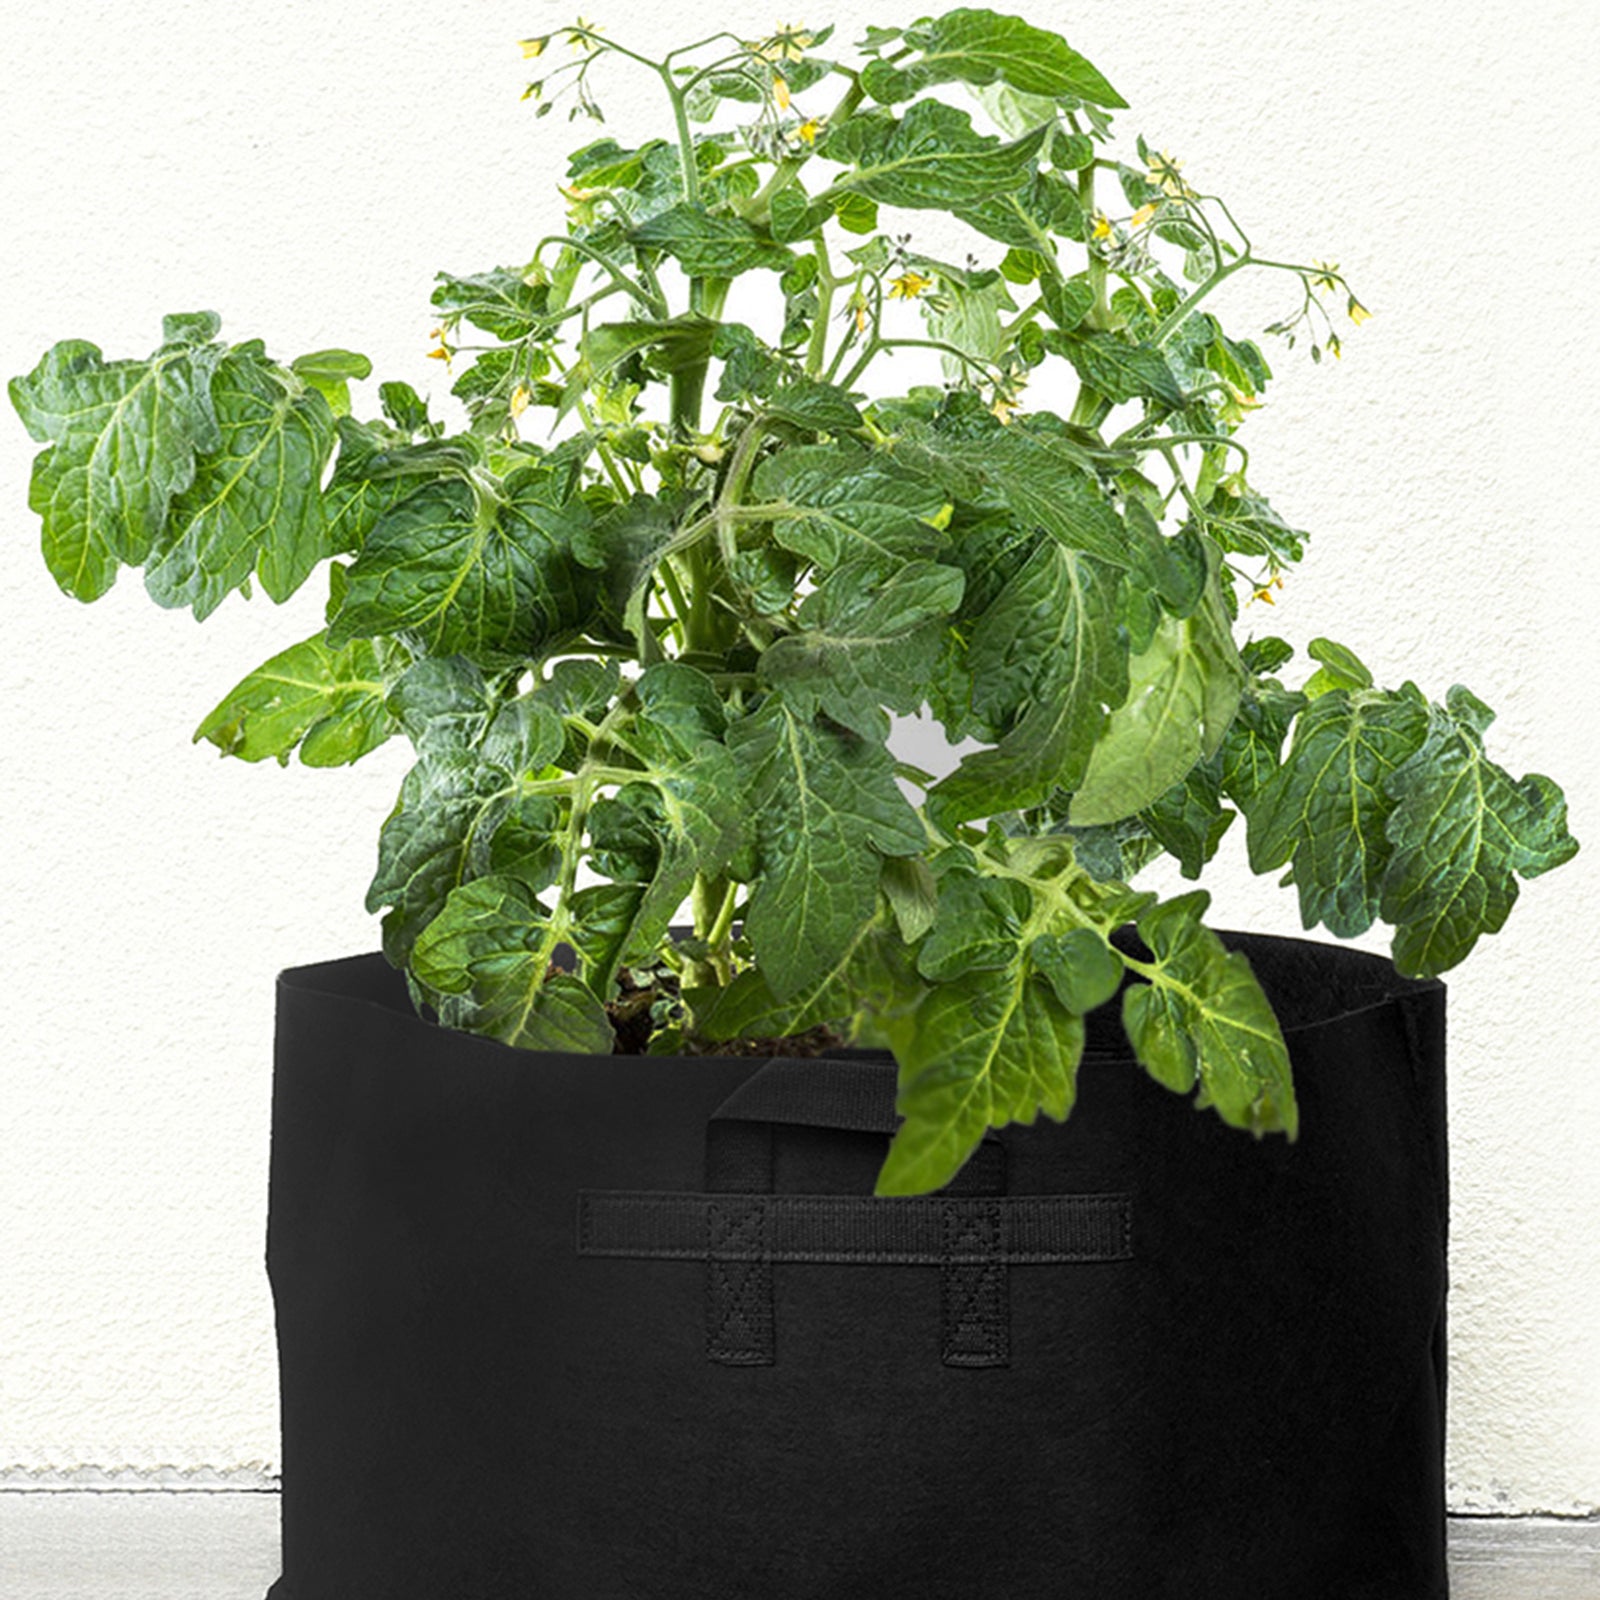 Six Great Containers for Growing Vegetables